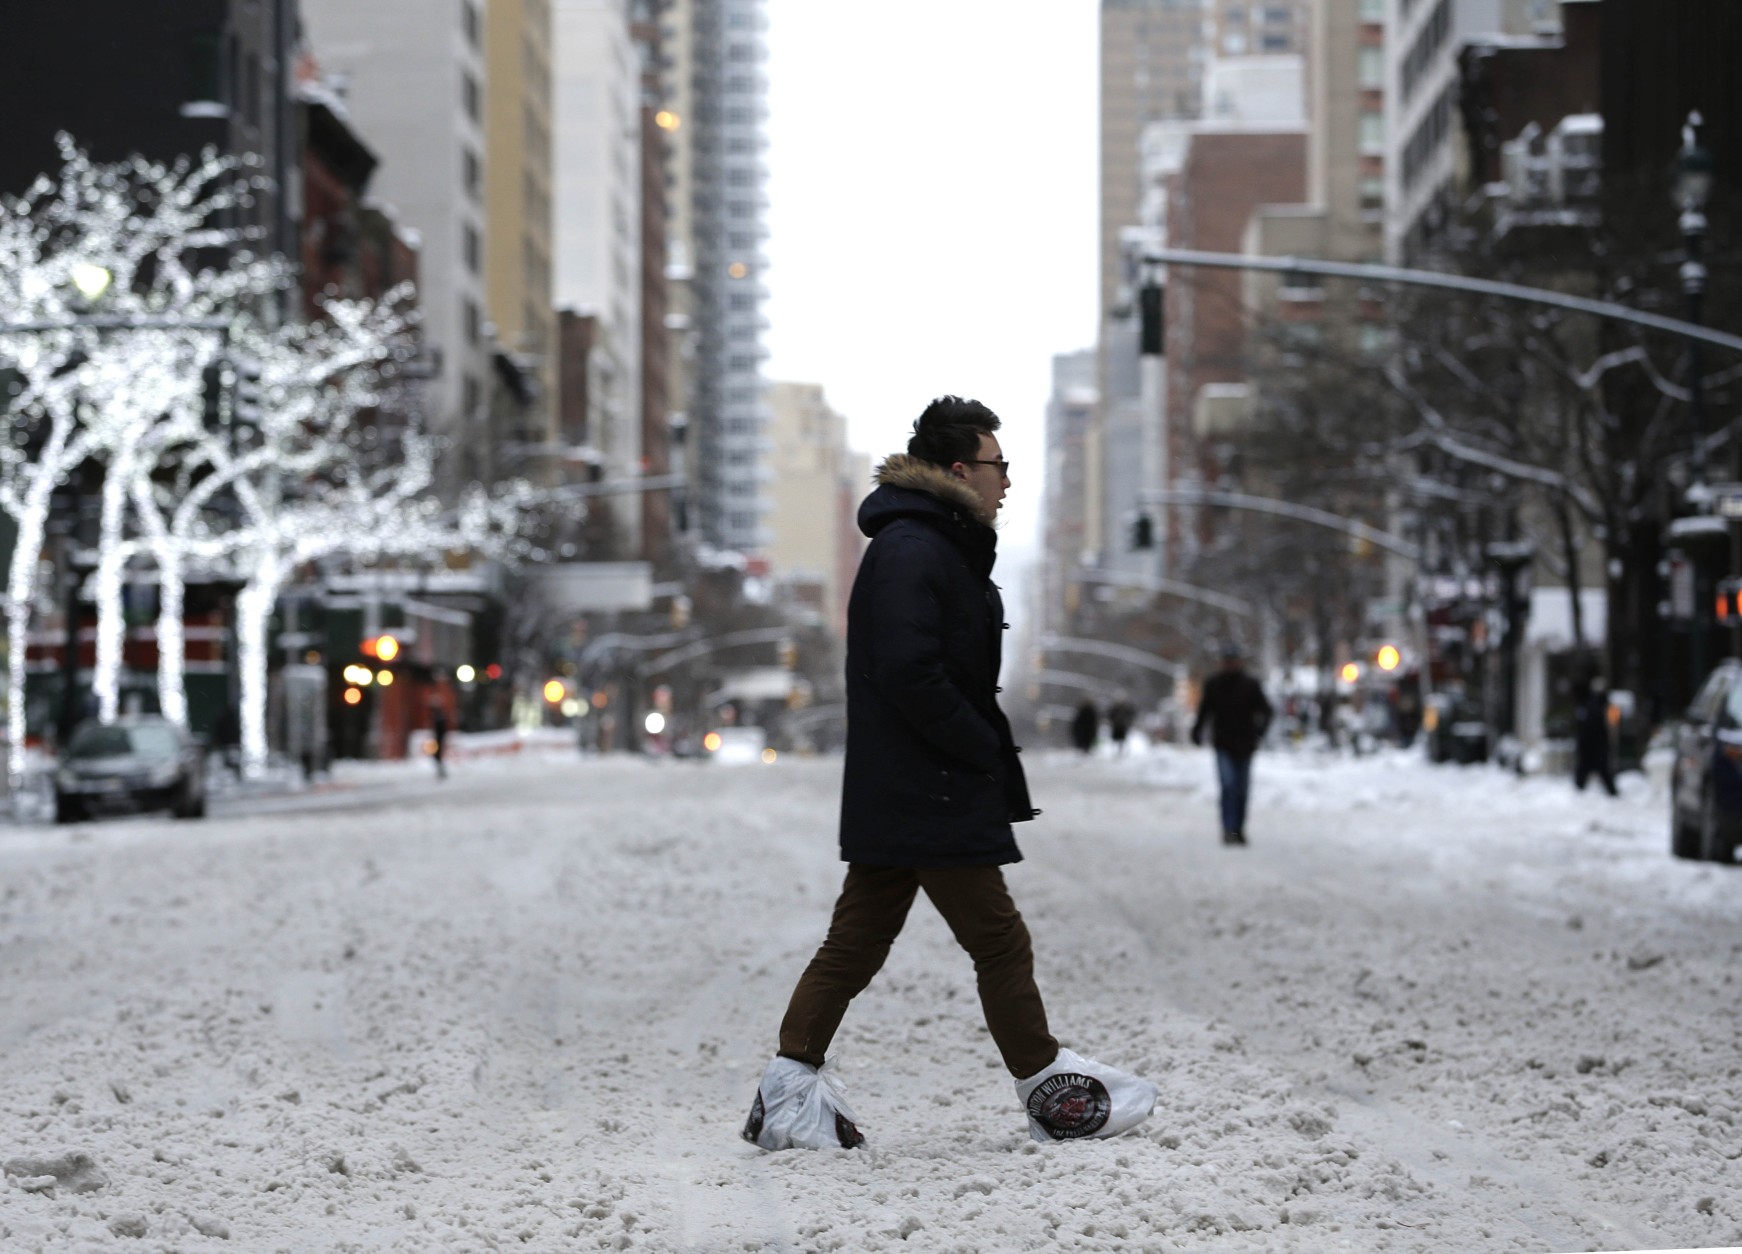 A man wearing plastic bags on his feet crosses a snowy avenue in New York, Tuesday, Jan. 27, 2015. A storm packing blizzard conditions spun up the East Coast early Tuesday, pounding parts of coastal New Jersey northward through Maine with high winds and heavy snow. (AP Photo/Seth Wenig)